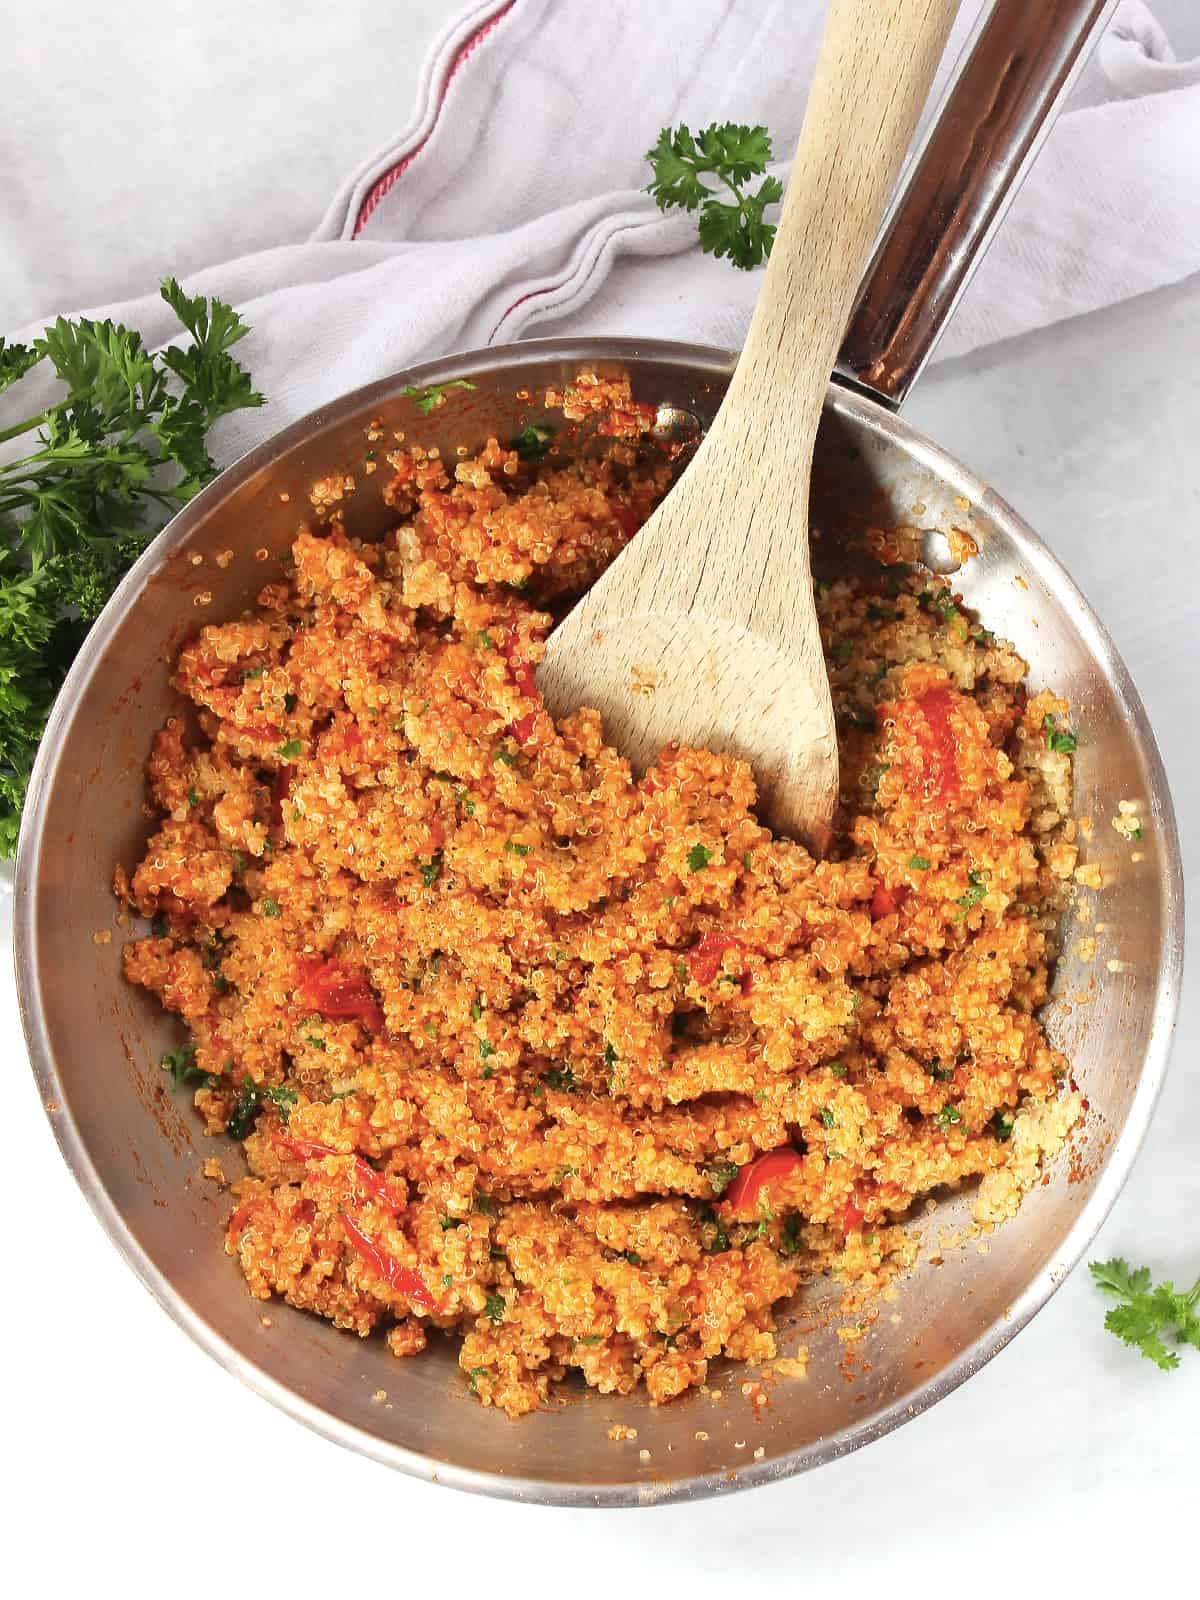 Tomato quinoa in a silver skillet with a wooden spoon.